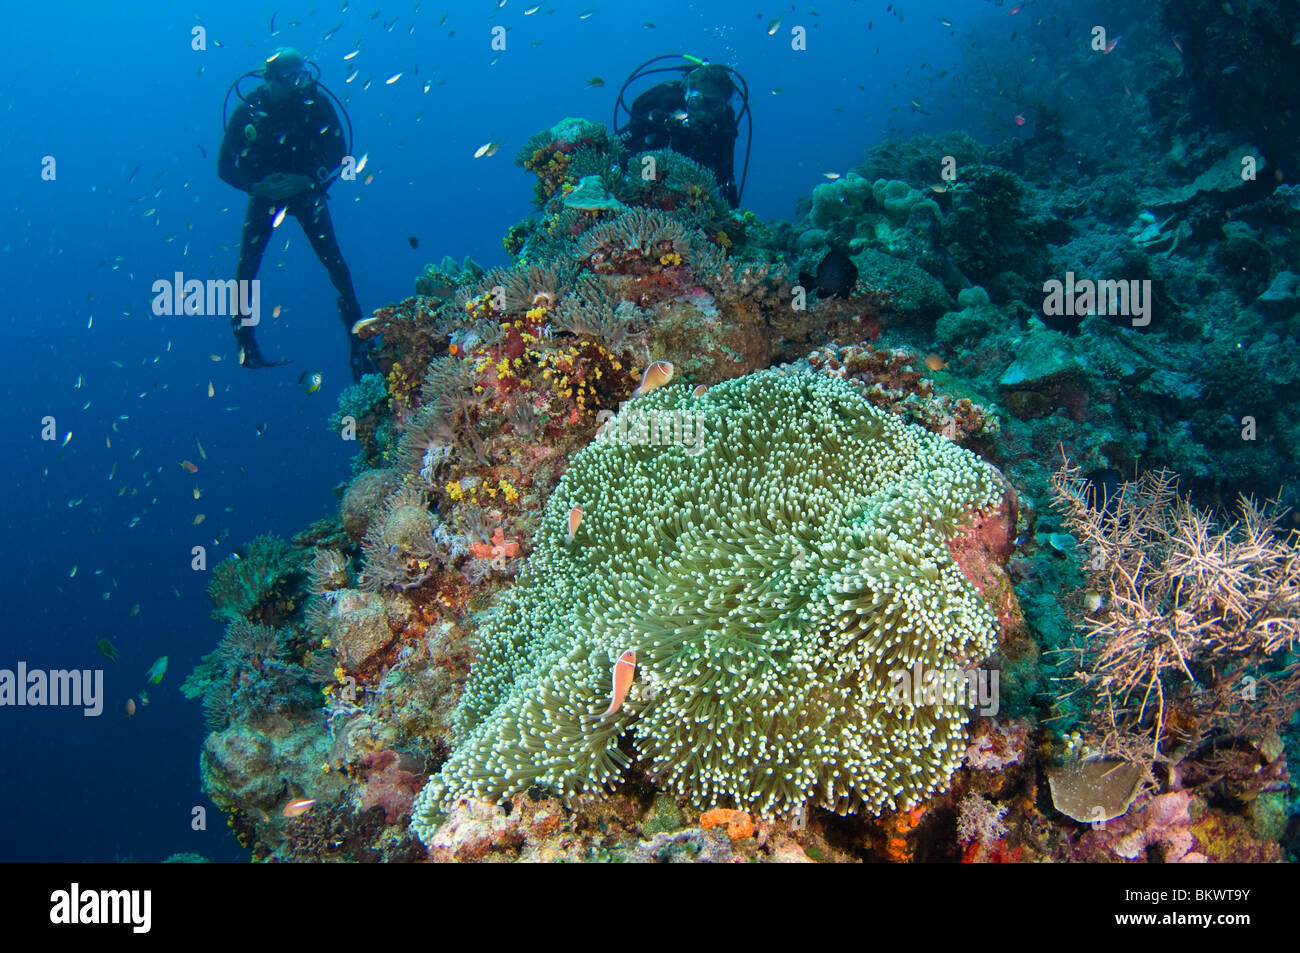 Pink Anemonefish, Amphiprion perideraion, on Sea Anemone, Heteractis magnifica, on wall, divers in background, Layang Layang Stock Photo